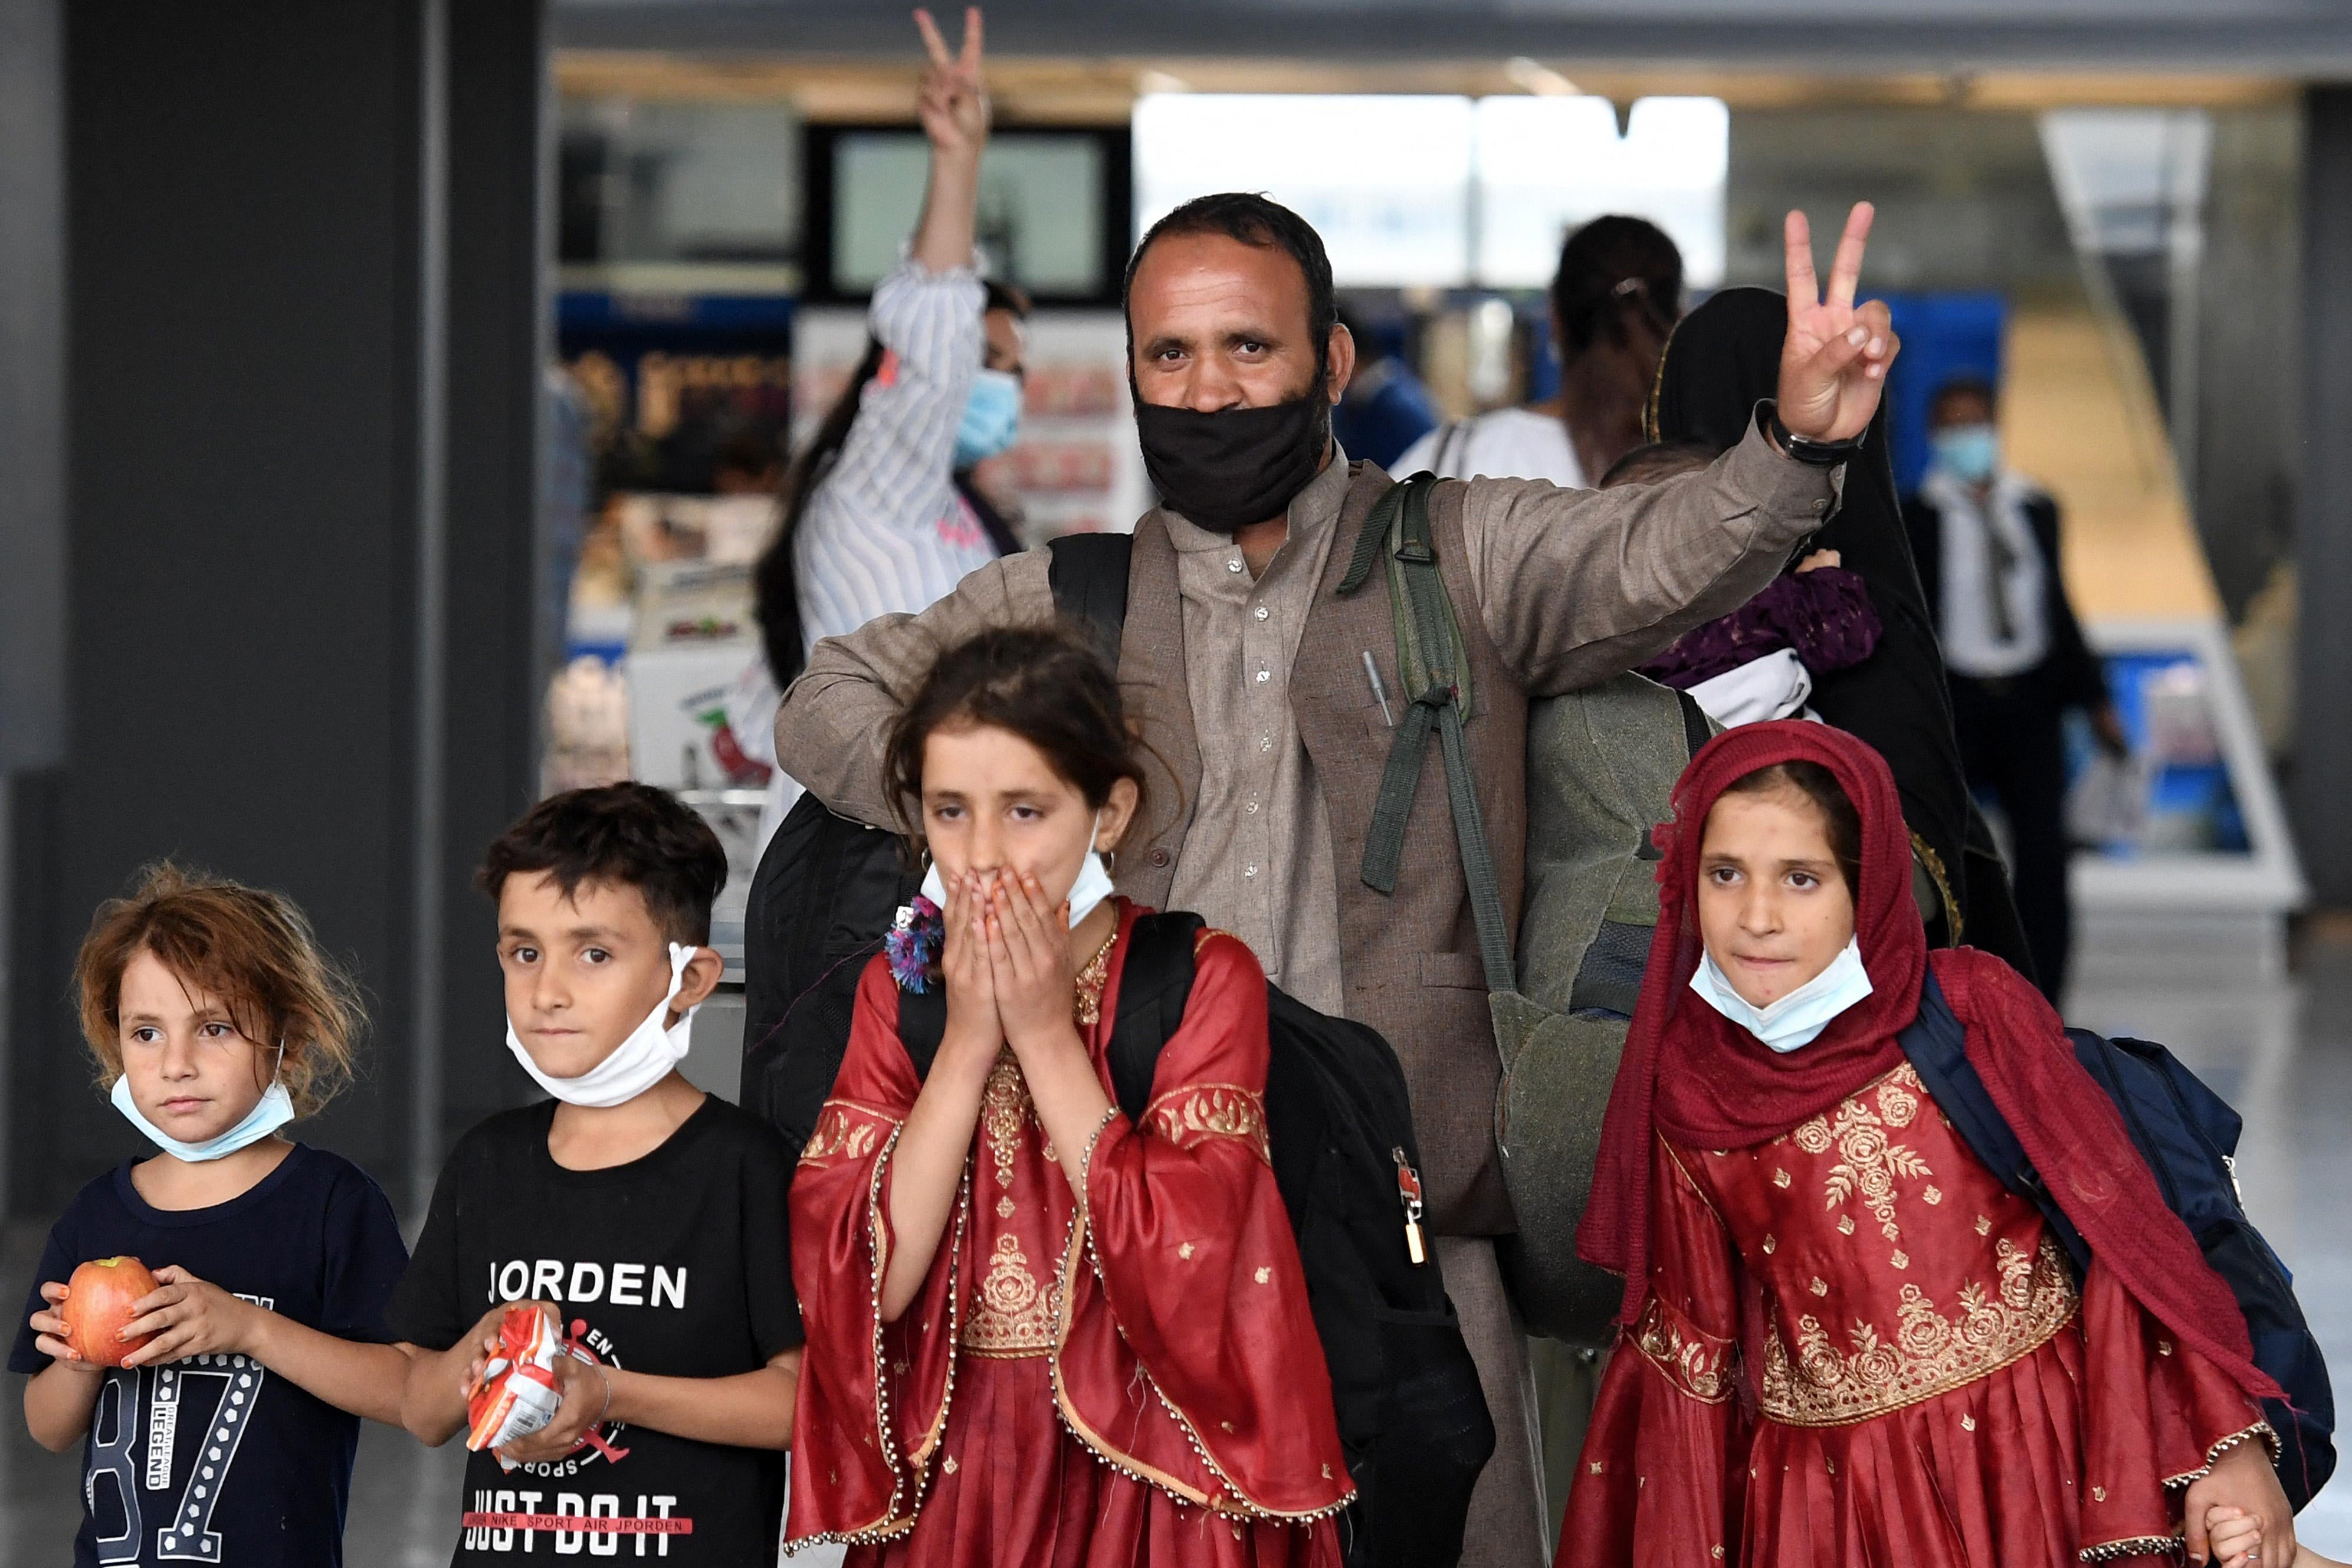 A family of Afghan refugees walks through the Dulles airport.